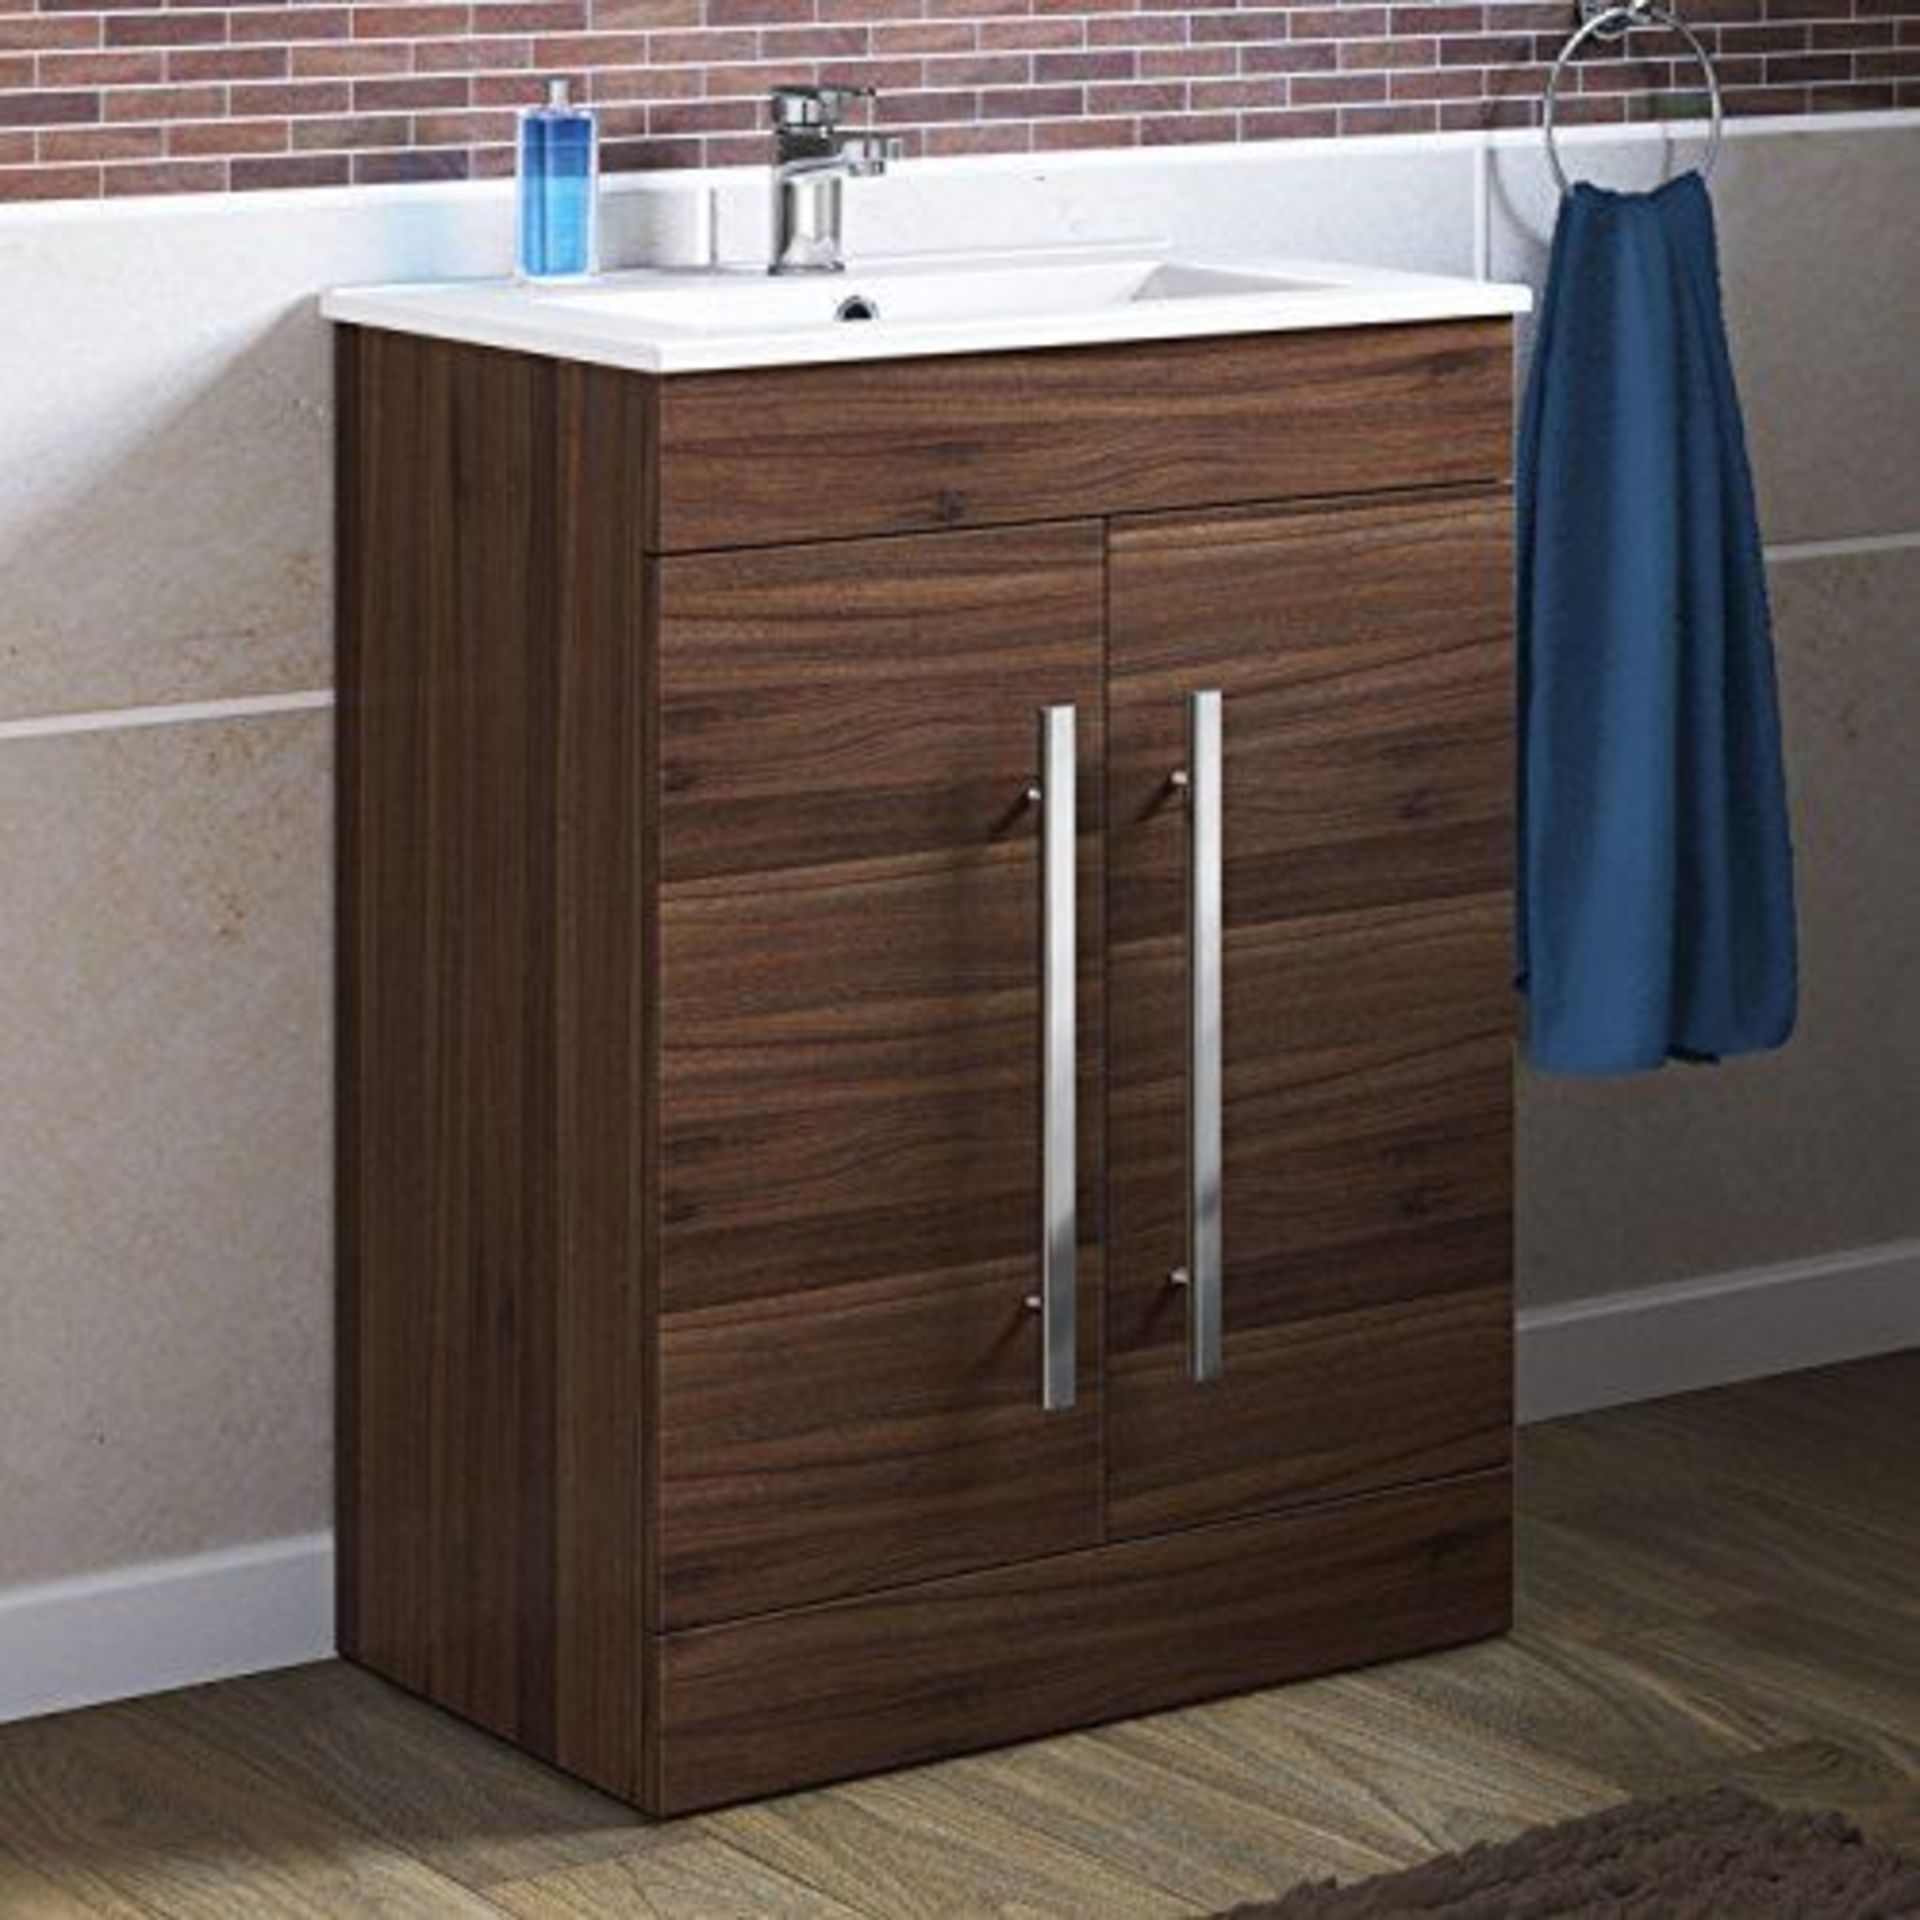 (J28) 600mm Avon Walnut Effect Sink Cabinet - Floor Standing. RRP £499.99. Comes complete with... - Image 3 of 4